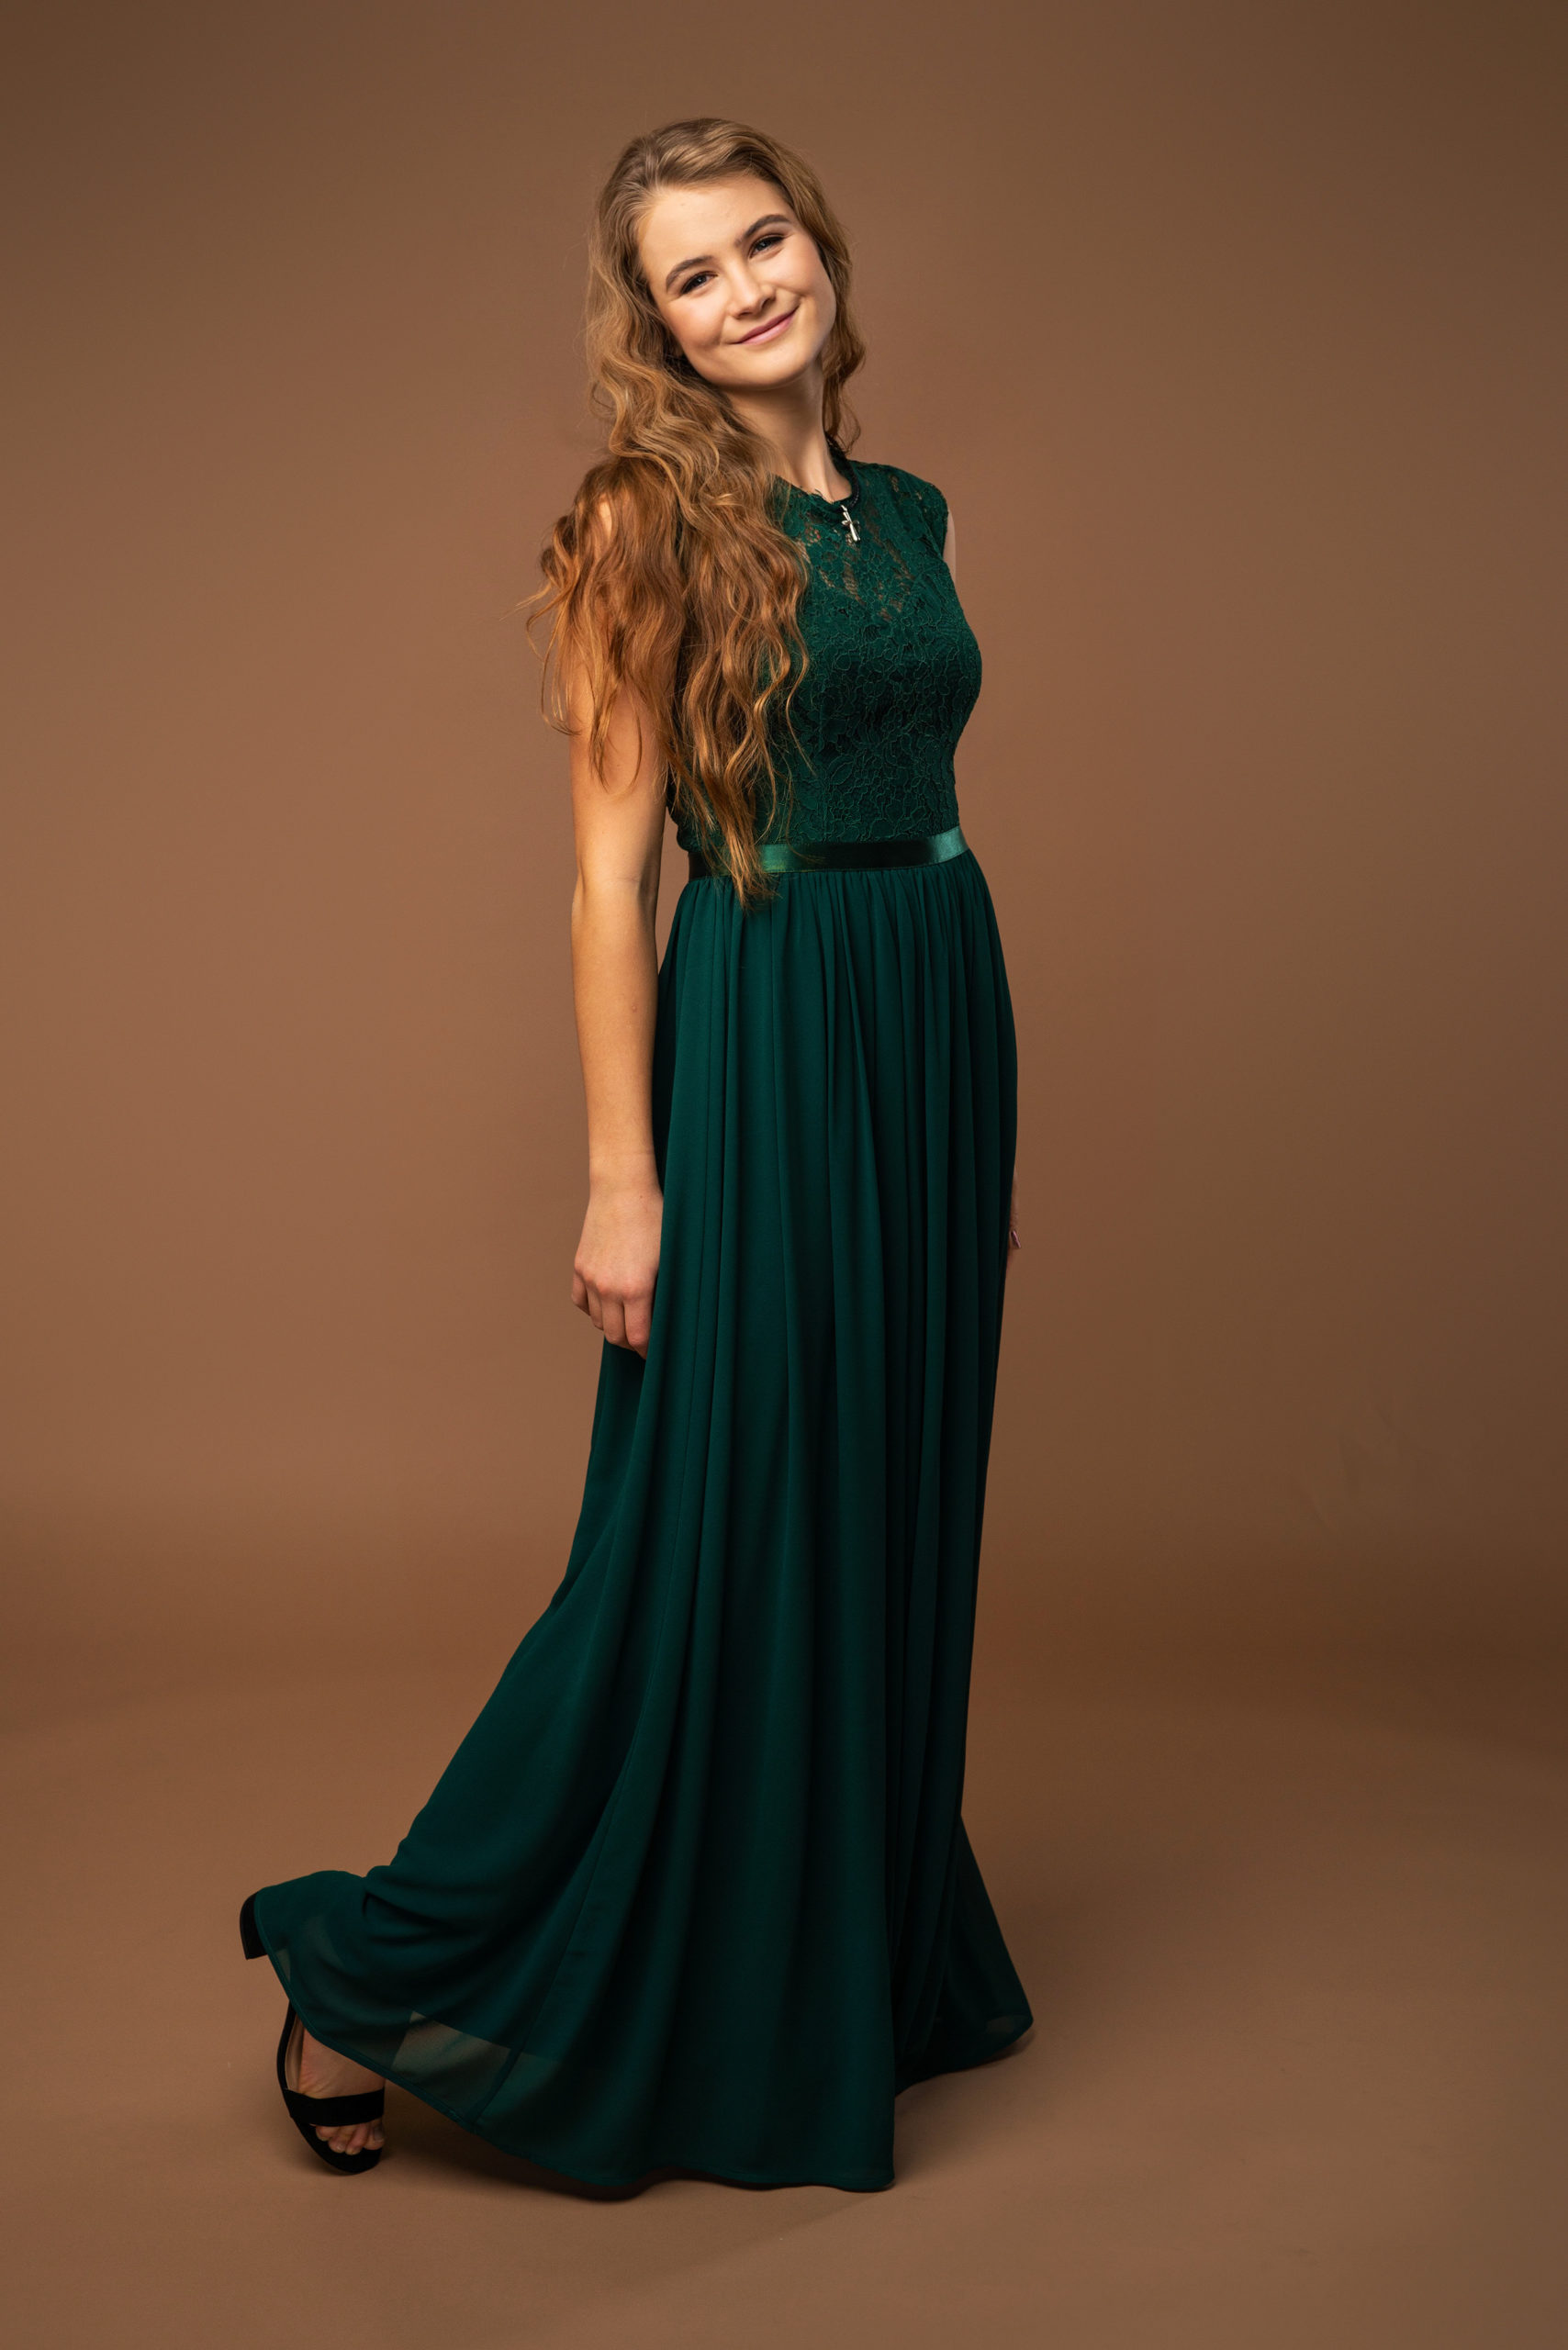 Hunter Green Sleeveless Chiffon Maxi Dress with Floral Lace Top